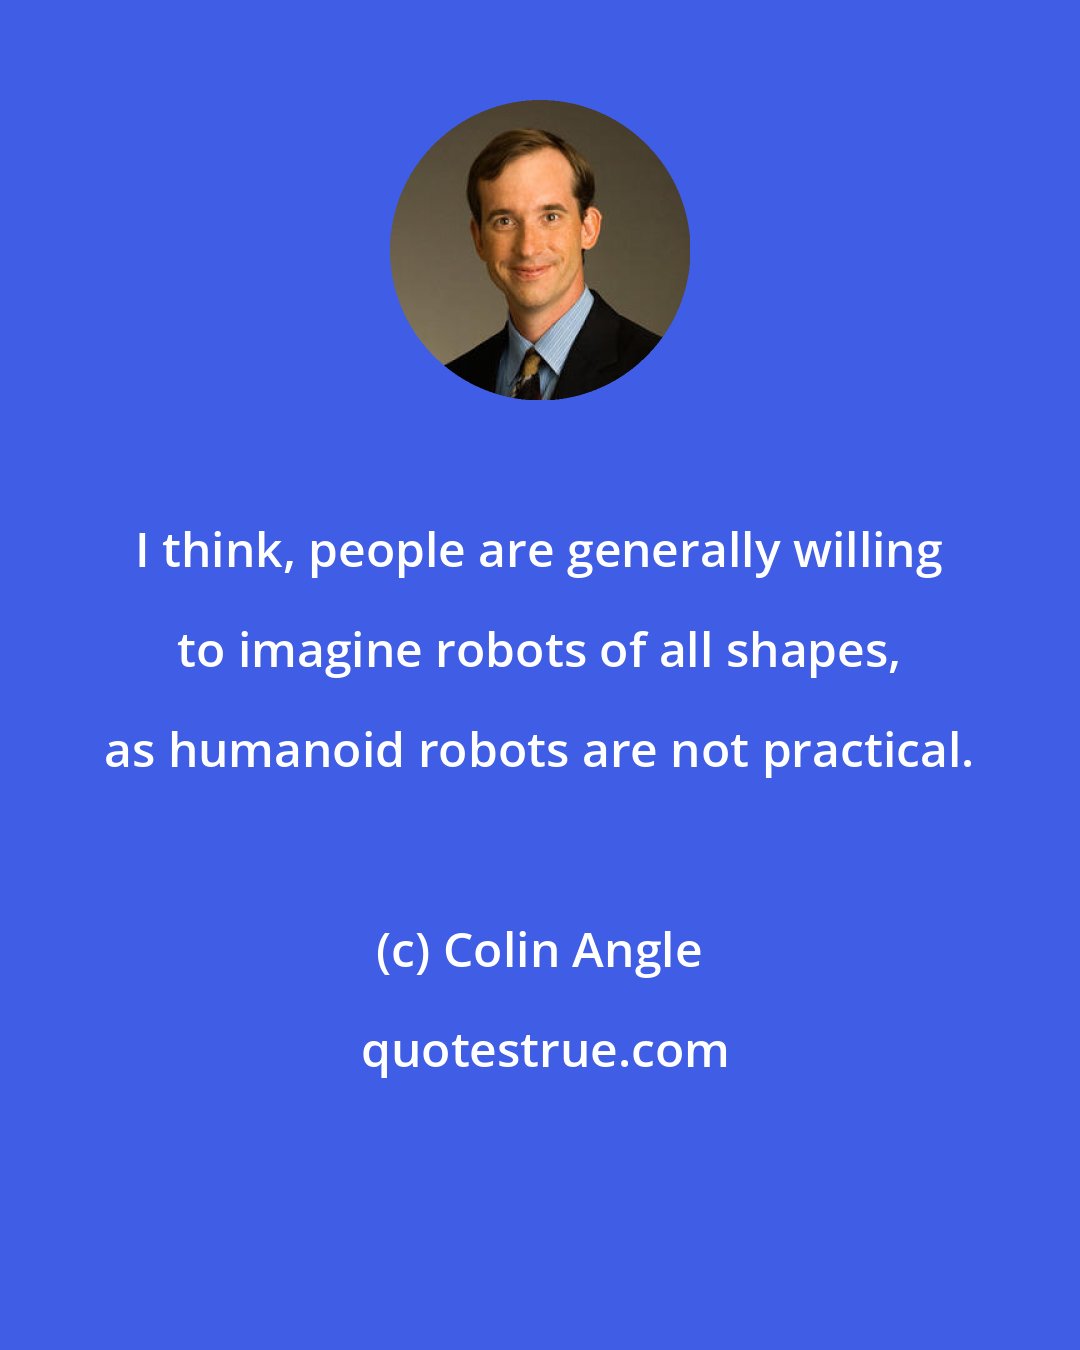 Colin Angle: I think, people are generally willing to imagine robots of all shapes, as humanoid robots are not practical.